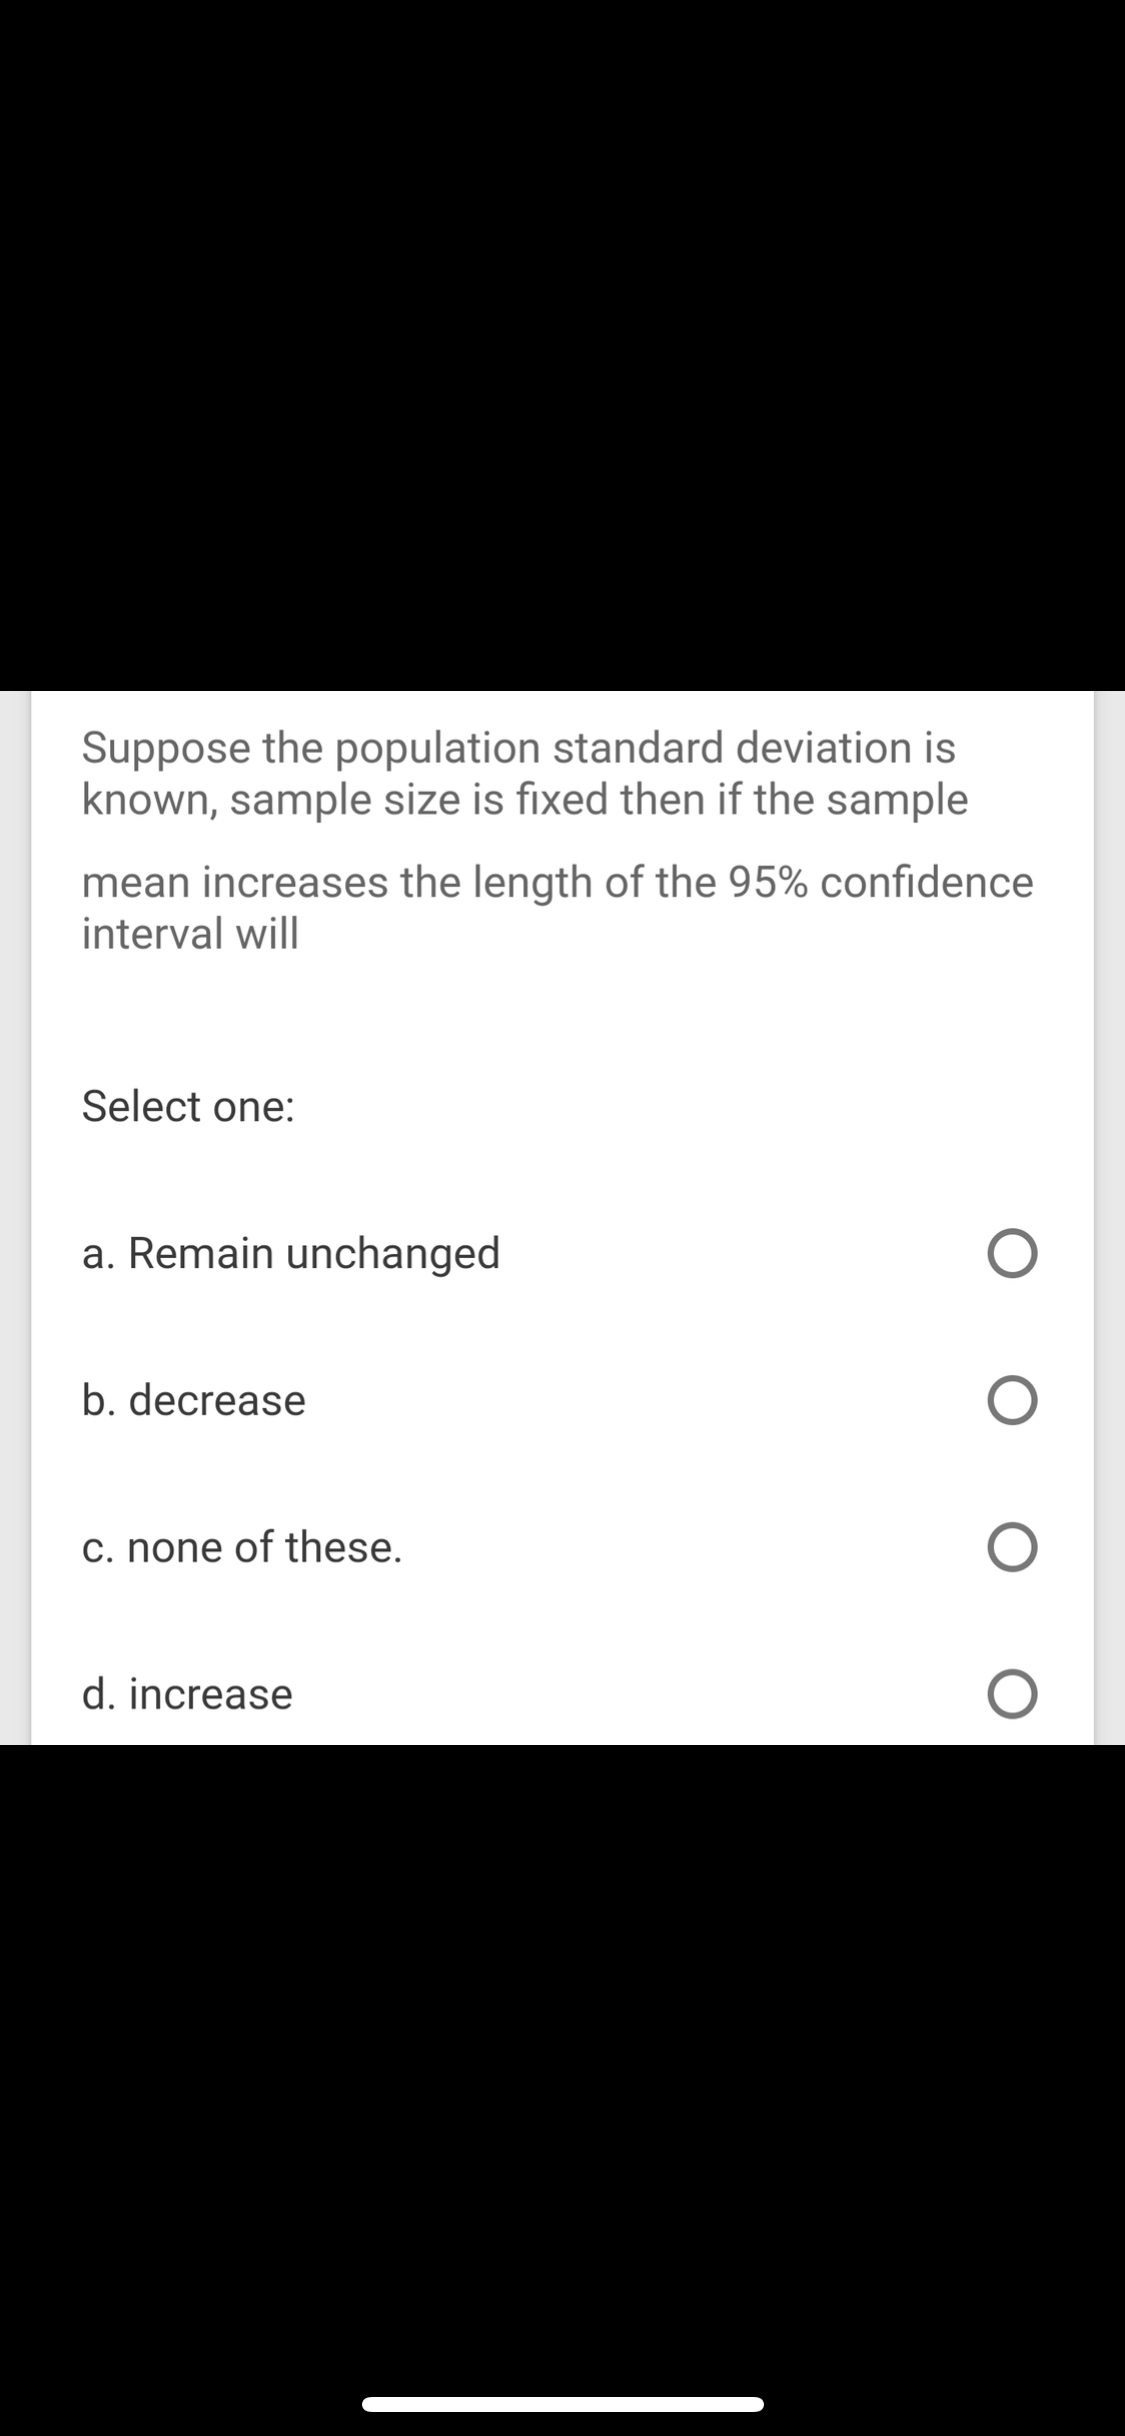 Suppose the population standard deviation is
known, sample size is fixed then if the sample
mean increases the length of the 95% confidence
interval will
